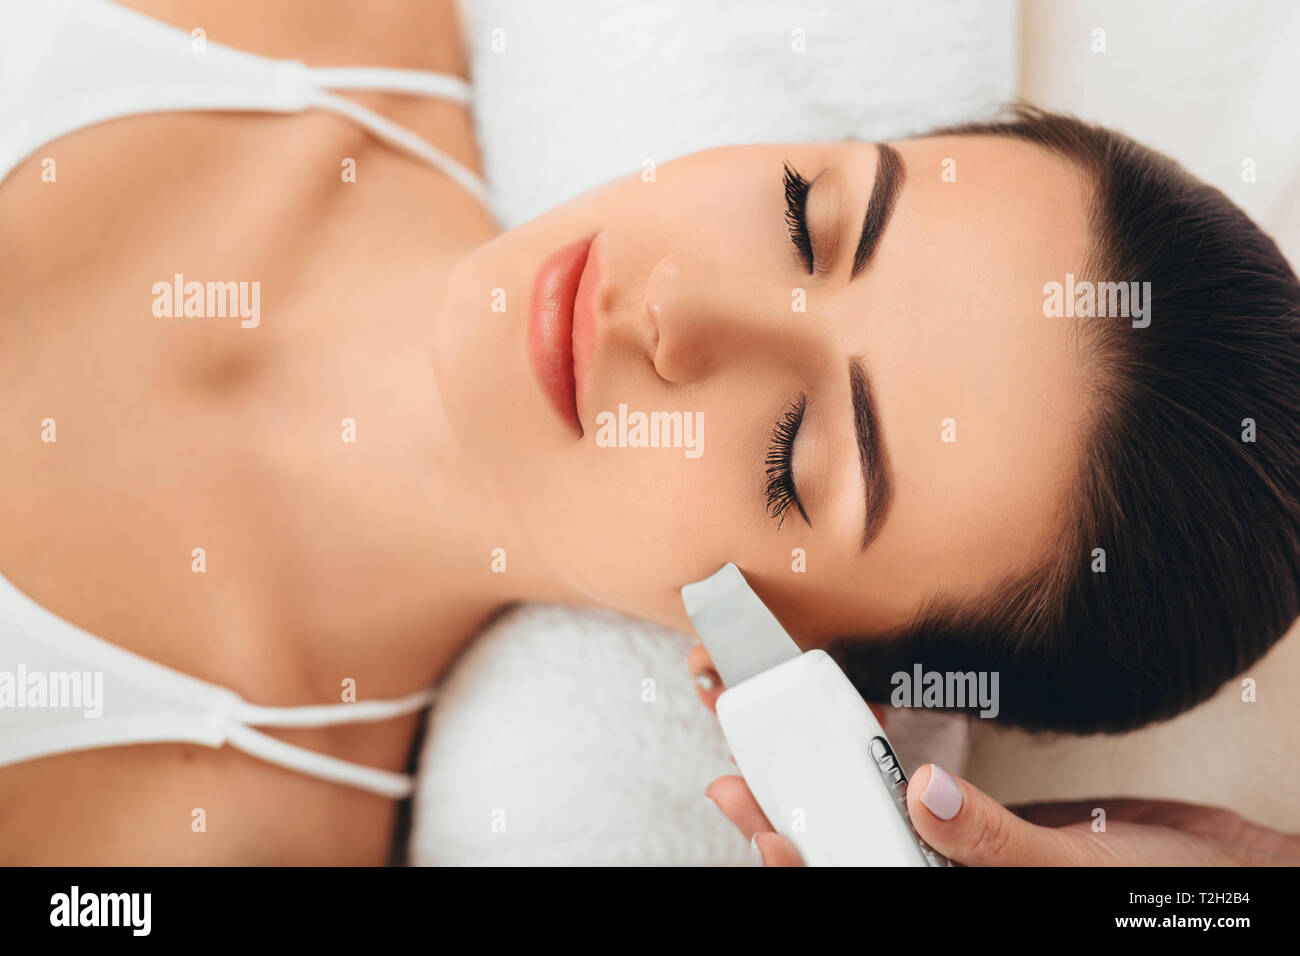 Beautiful woman receiving ultrasonic facial exfoliation at spa. Procedure clearing clogged pores, ultrasonic treatment for skin rejuvenation Stock Photo